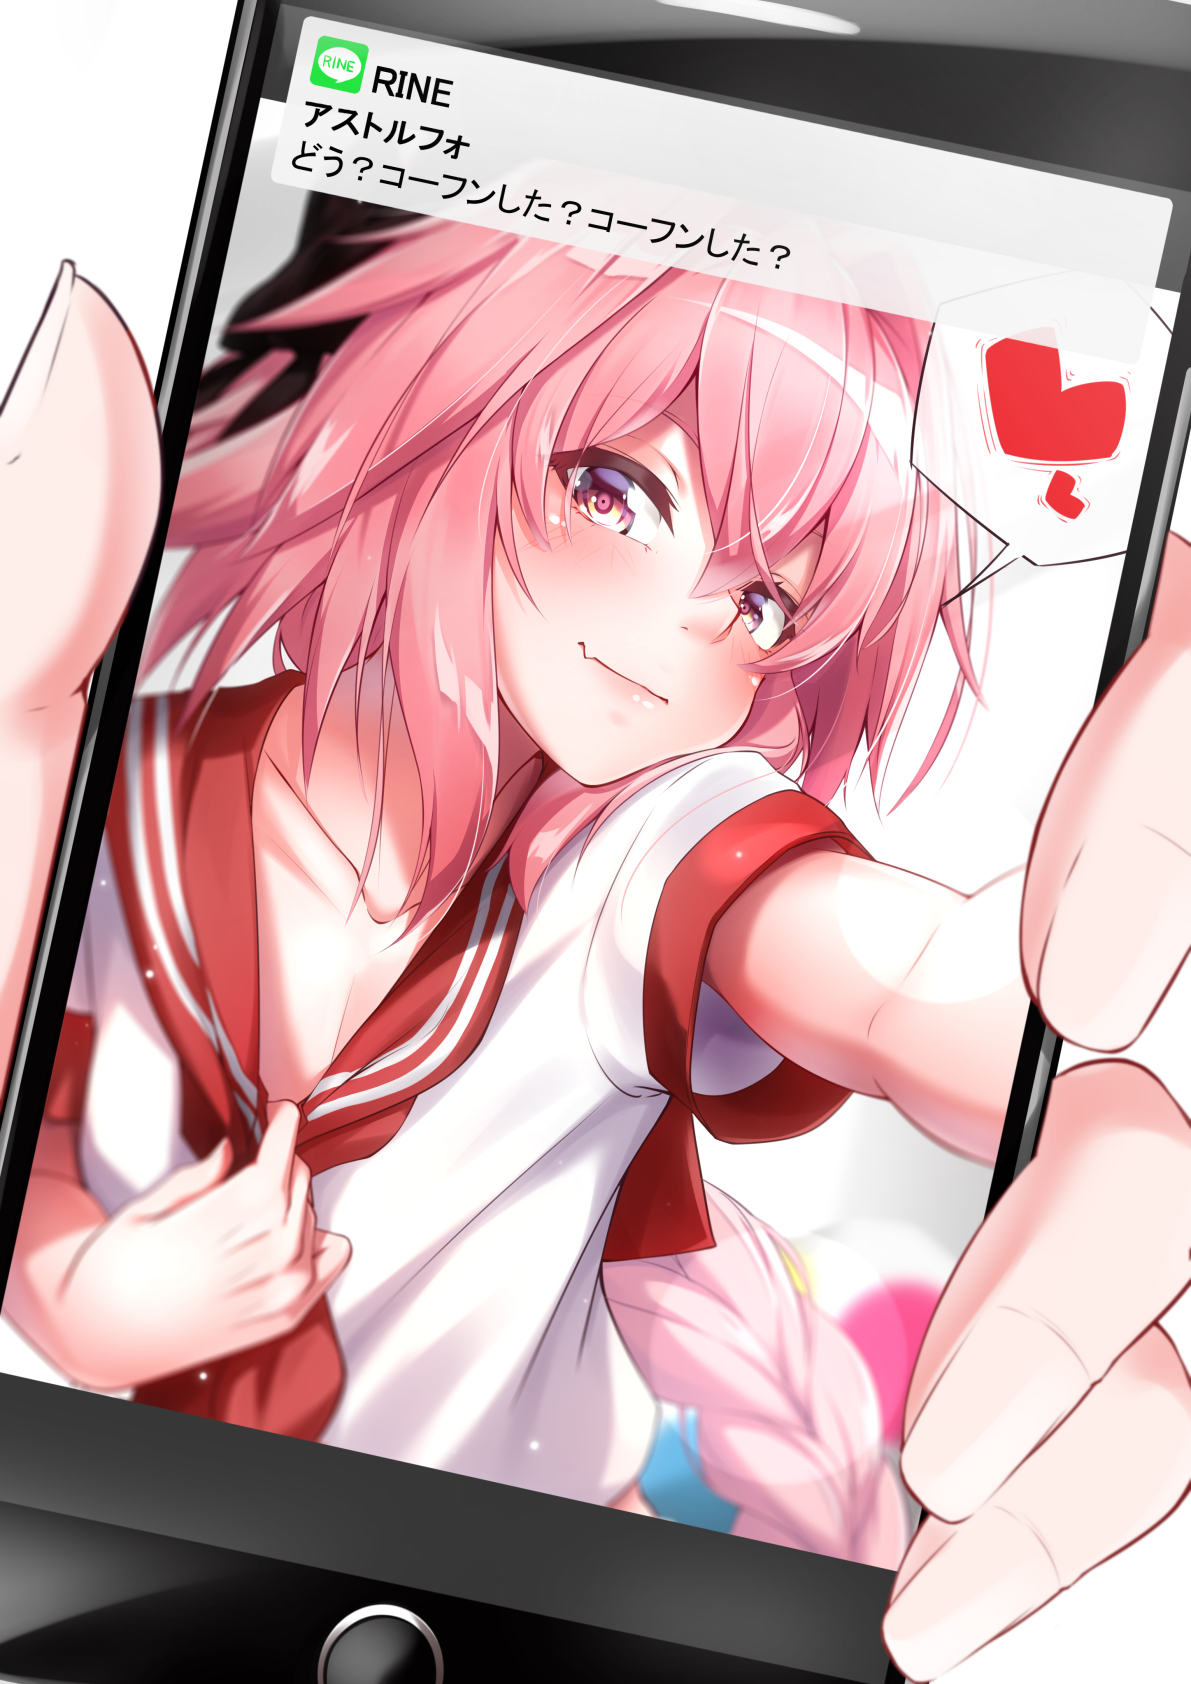 Fate Series Fate Apocrypha Fate Grand Order Anime Boys Rider Of Black Astolfo Fate Apocrypha Pink Ha 1191x1684